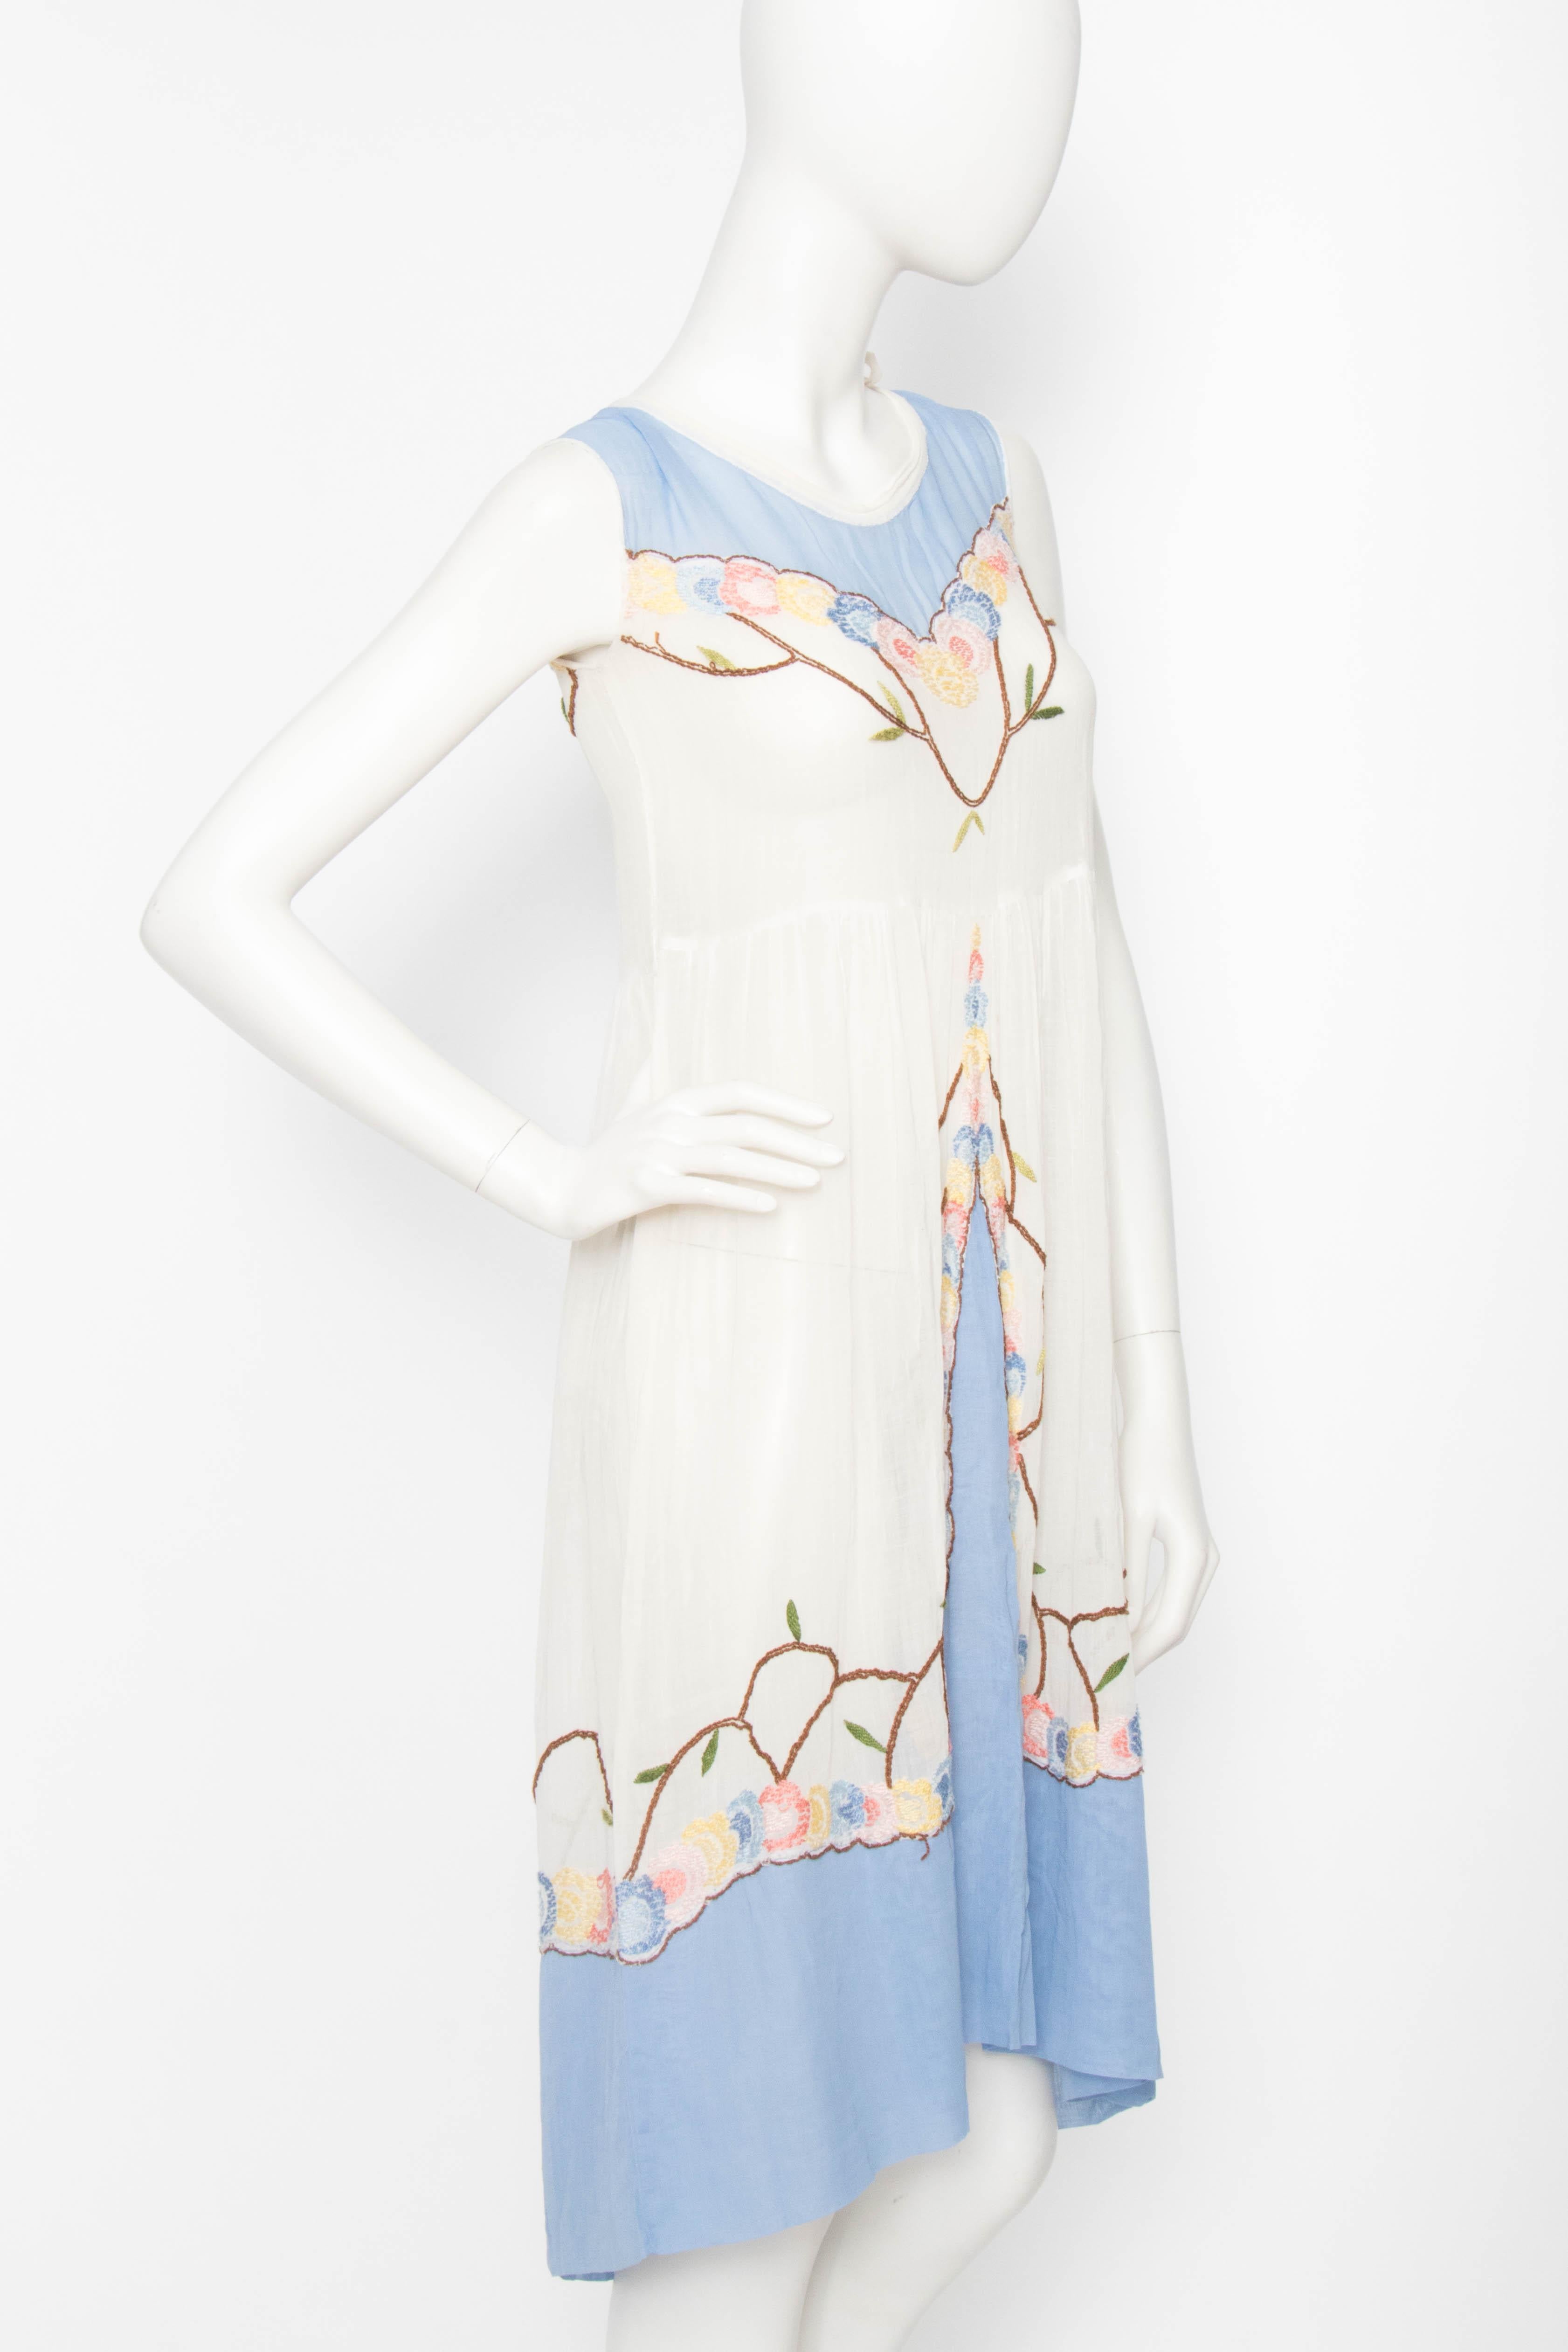 A great 1920s vintage french embroidered dress made in thin cotton with a round neckline, a fitted waist, and the most delicate floral embroidery. 

The size of the dress corresponds to a modern size small, but please see the measurements below to